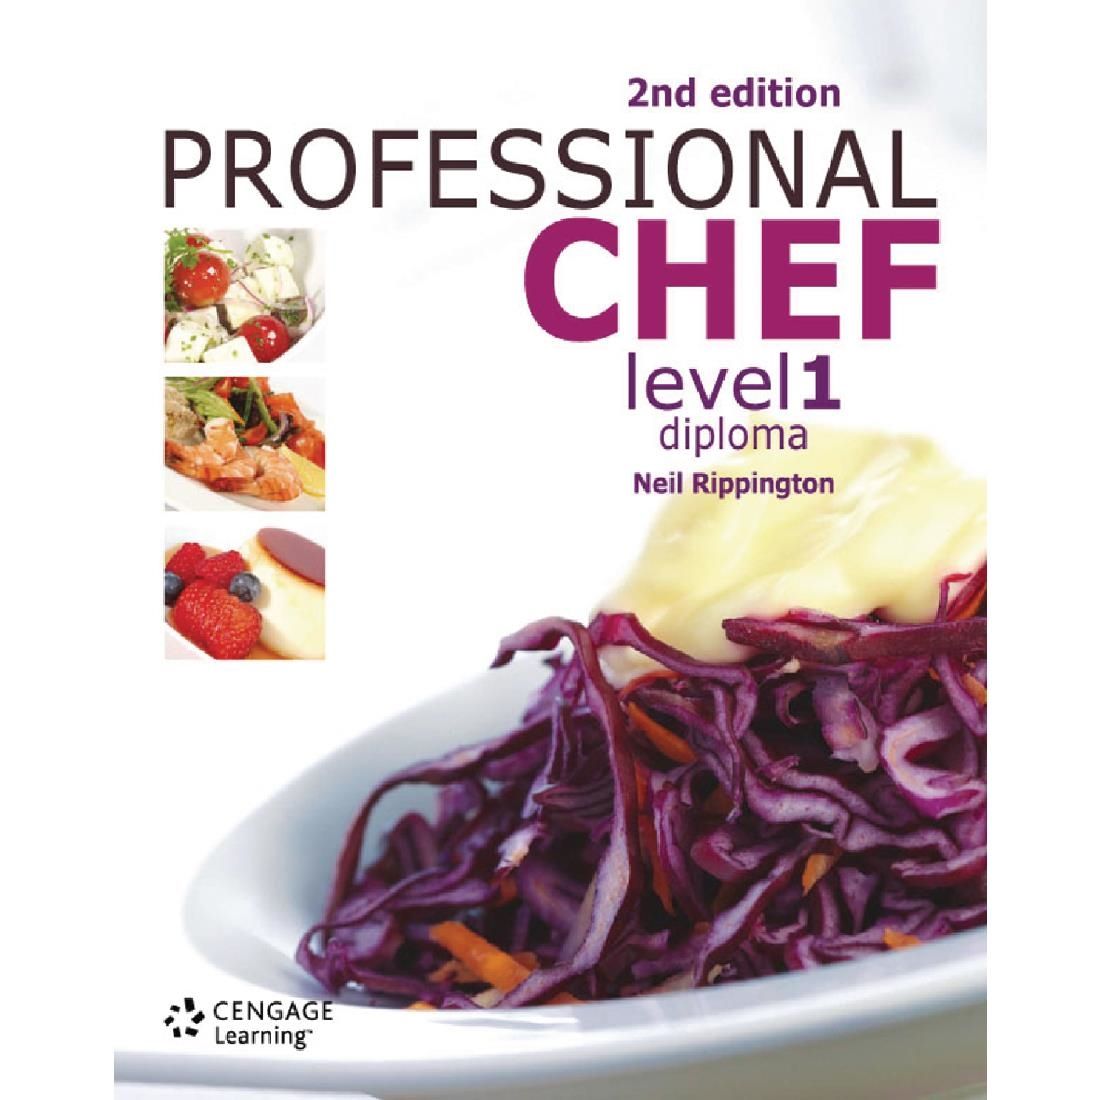 1G0058 Professional Chef Level 1 Diploma - 2nd edition JD Catering Equipment Solutions Ltd